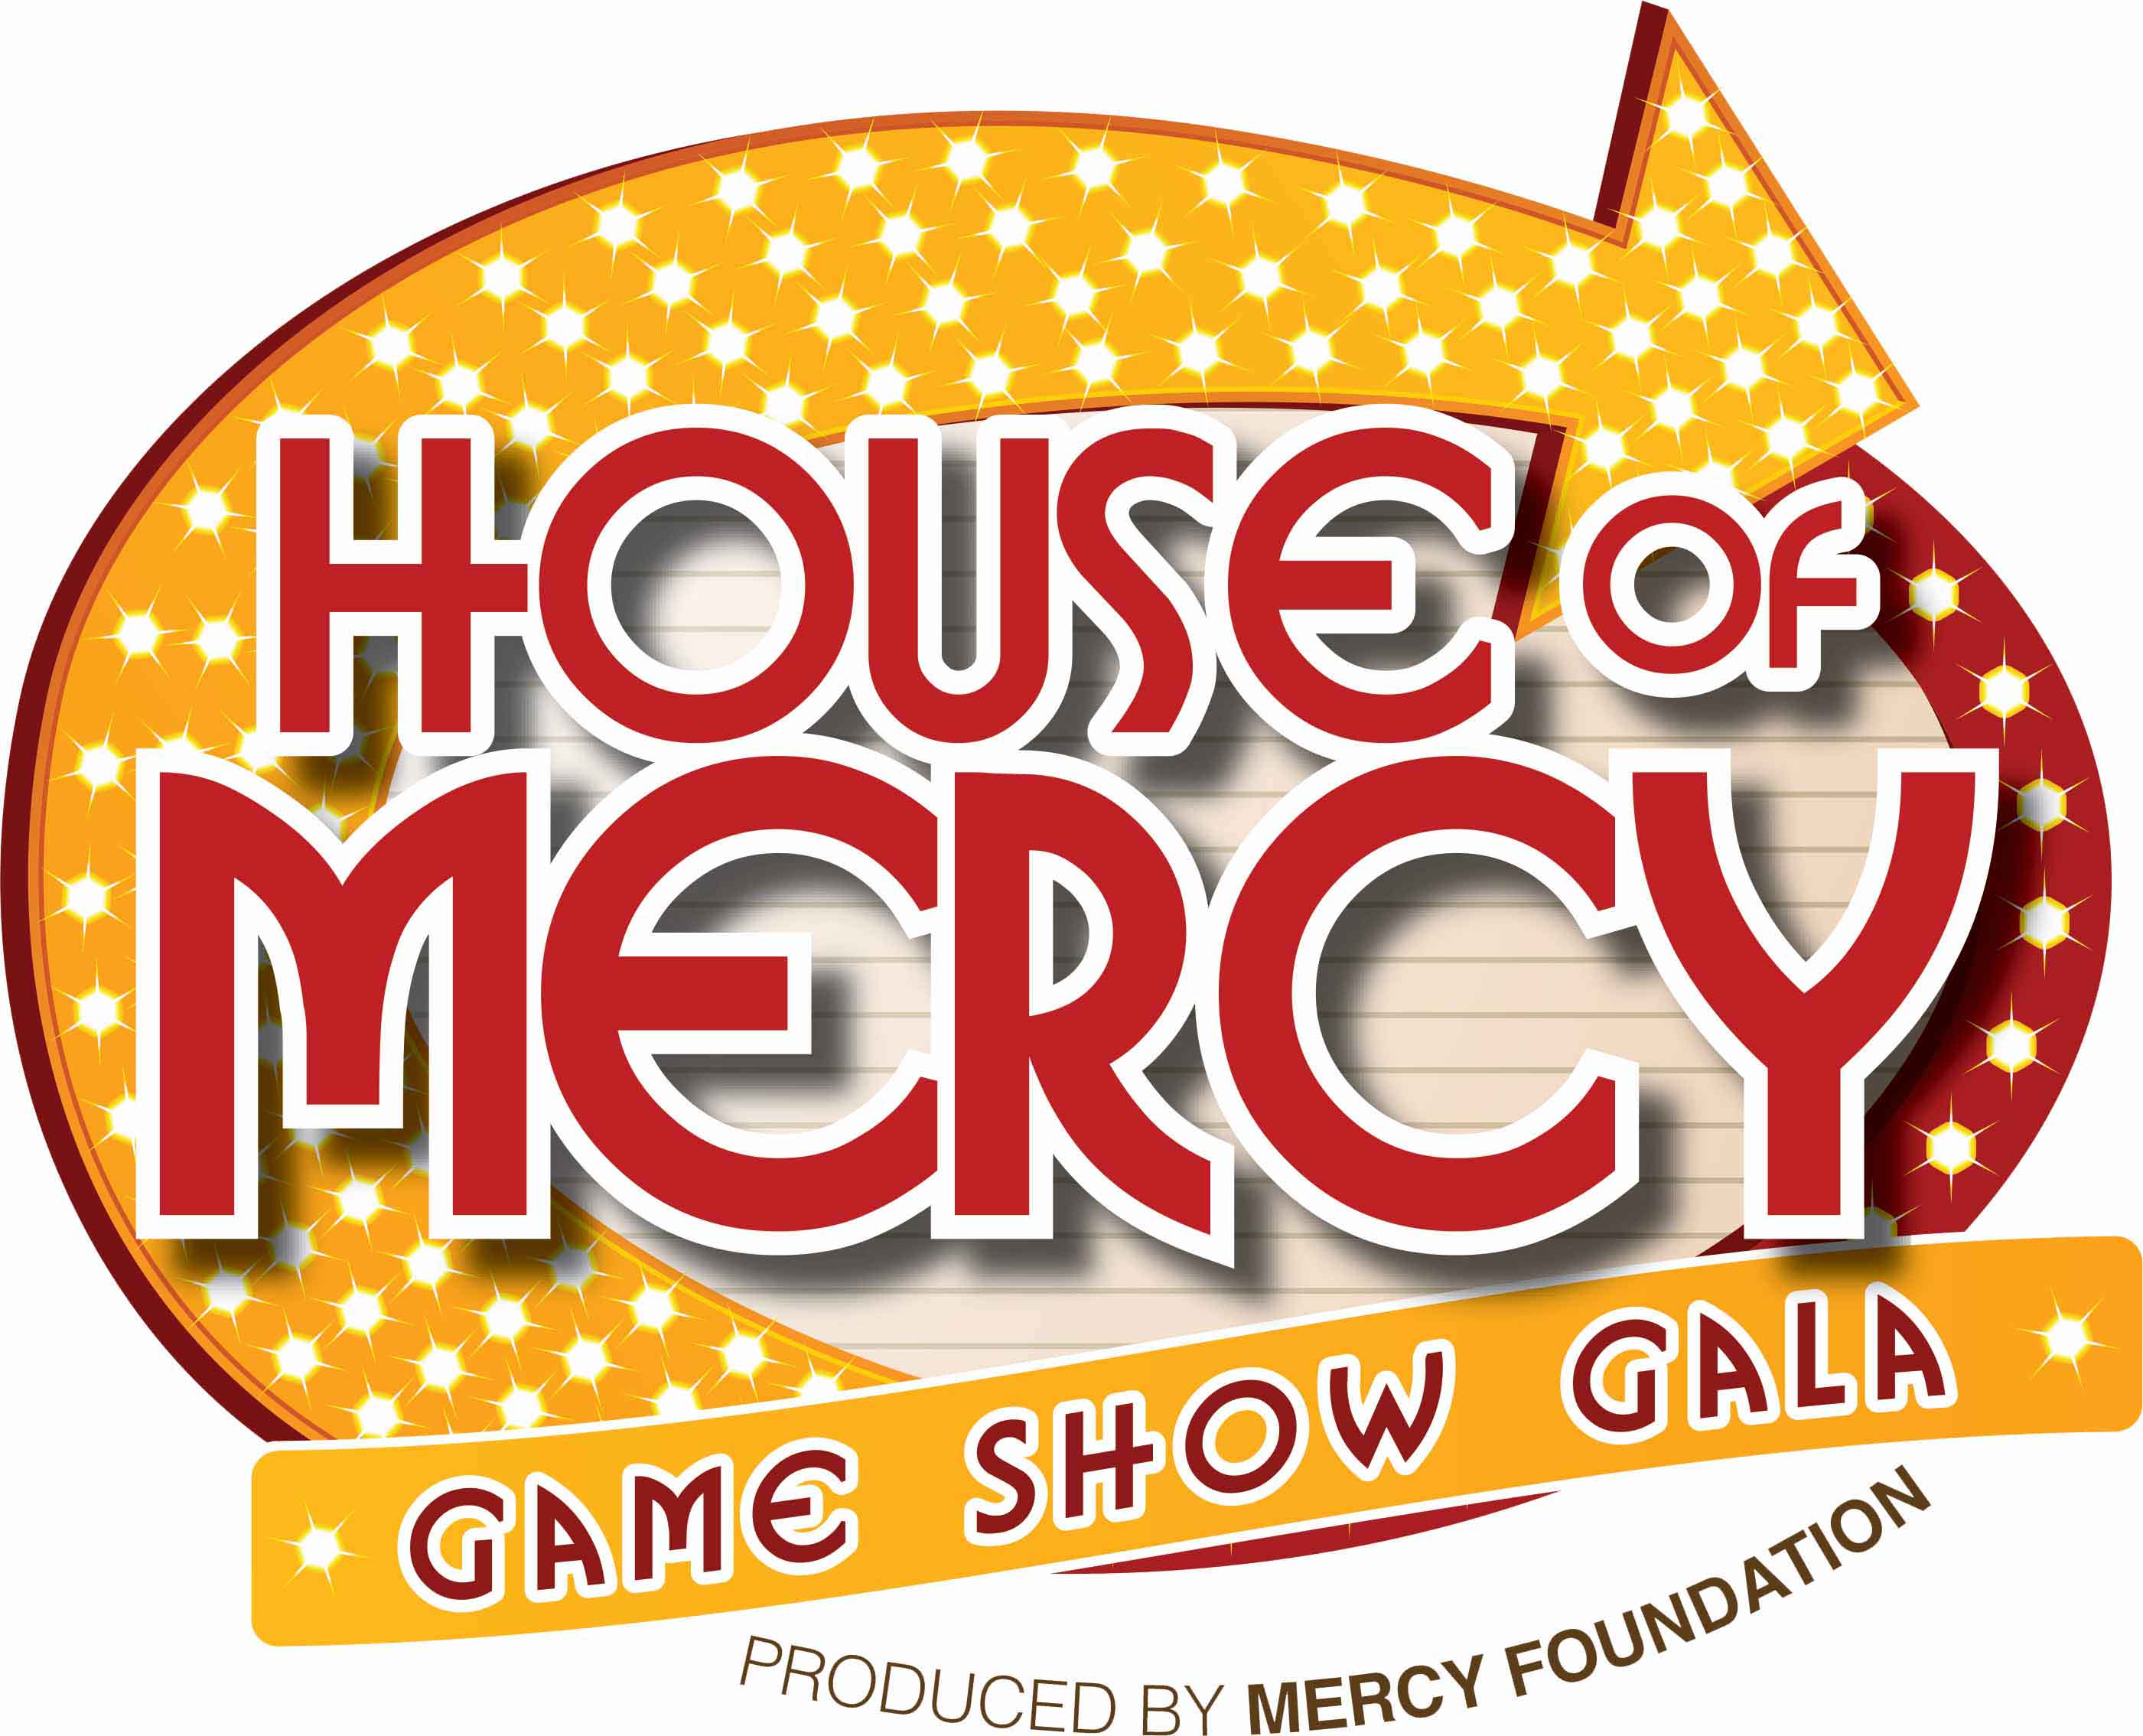 House of Mercy Game Show Gala